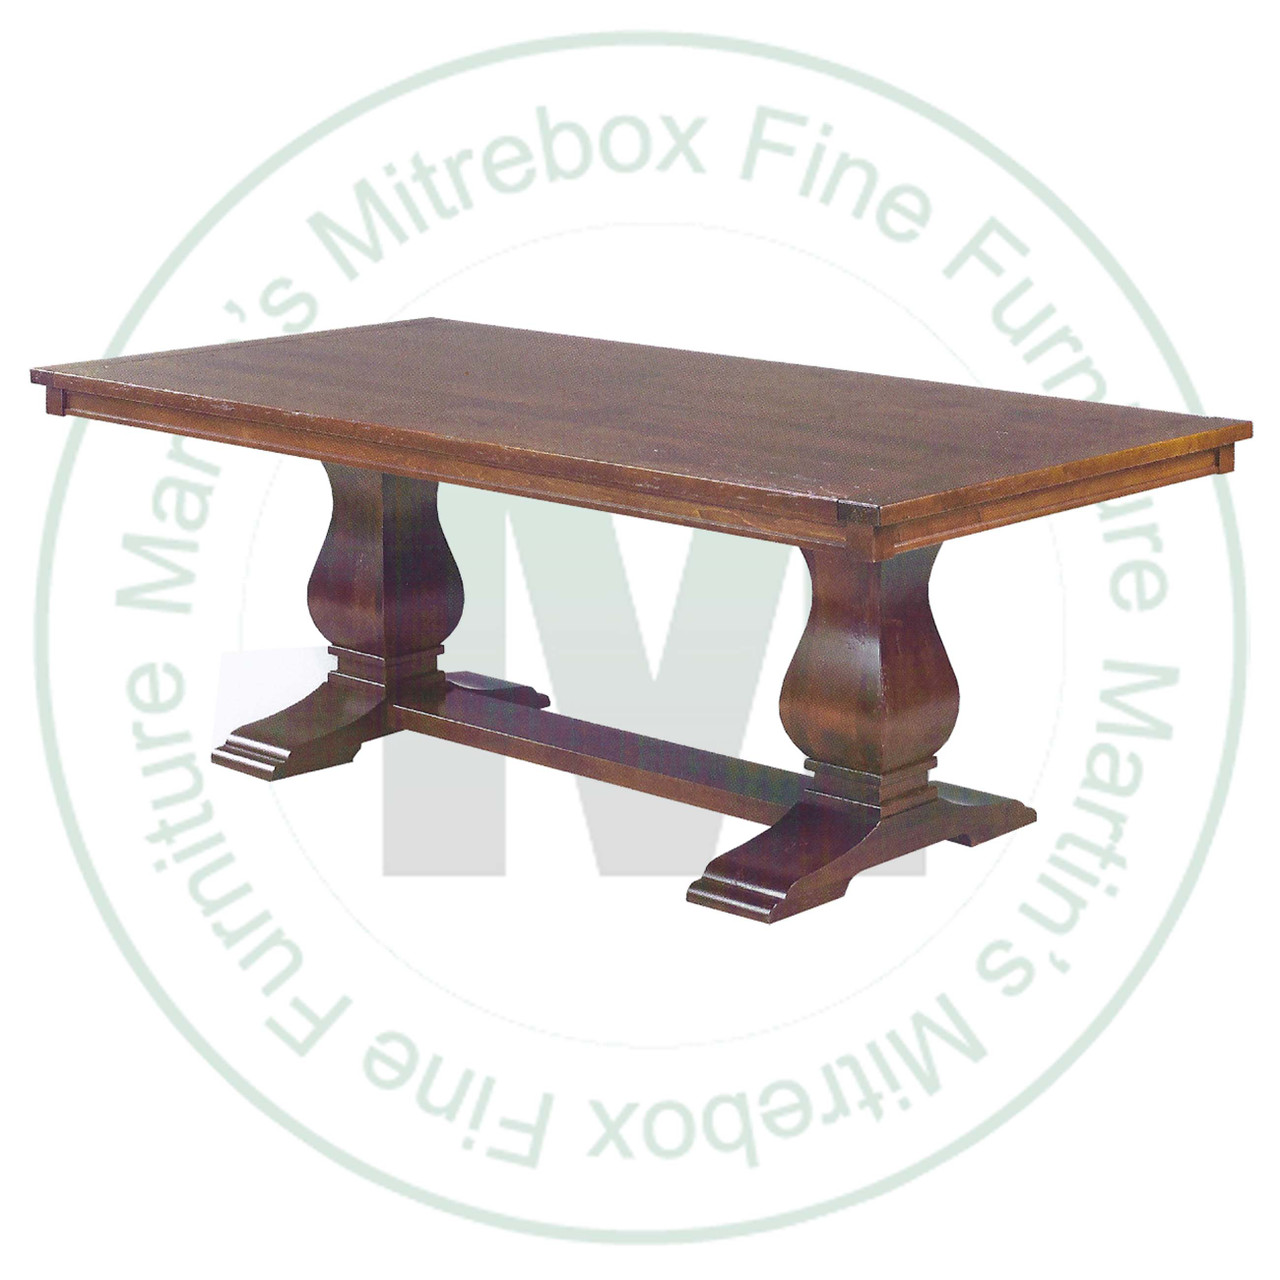 Maple Socrates Double Pedestal Table 42''D x 66''W x 30''H With 4 - 12'' Leaves. Table Has 1.25'' Thick Top